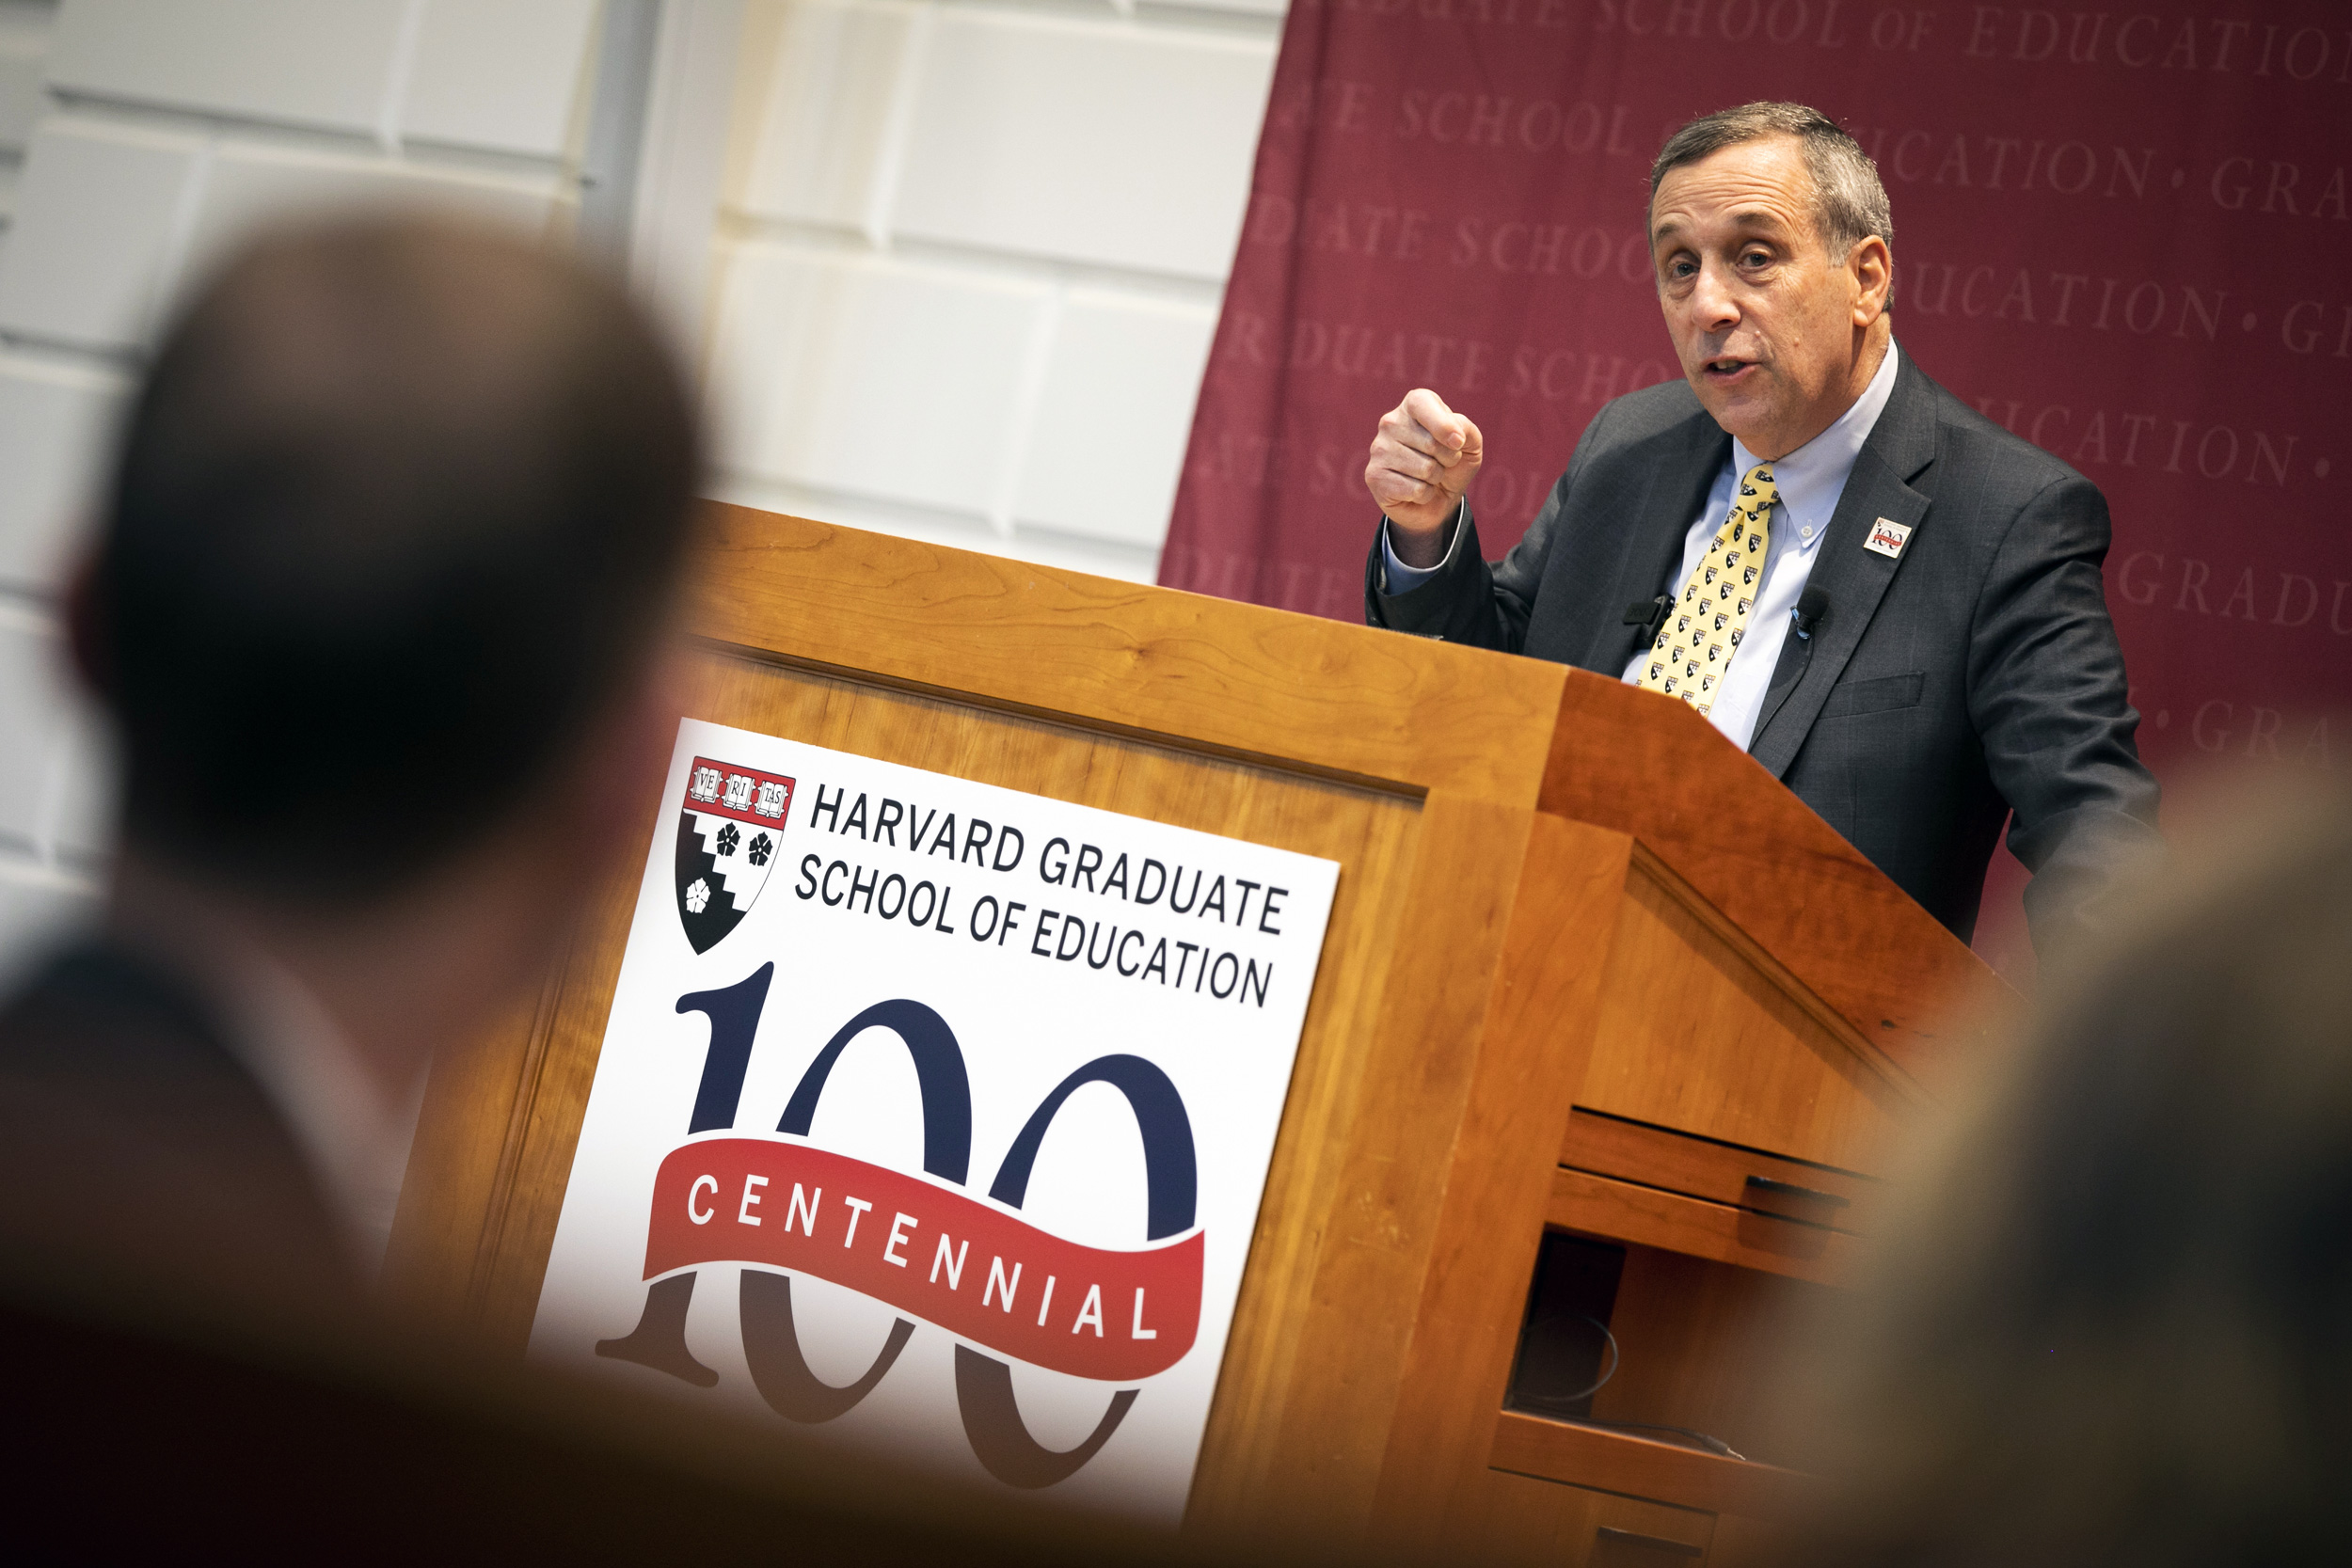 Bacow speaks from the podium when the Graduate School of Education kicked off its centennial celebration in January 2020.